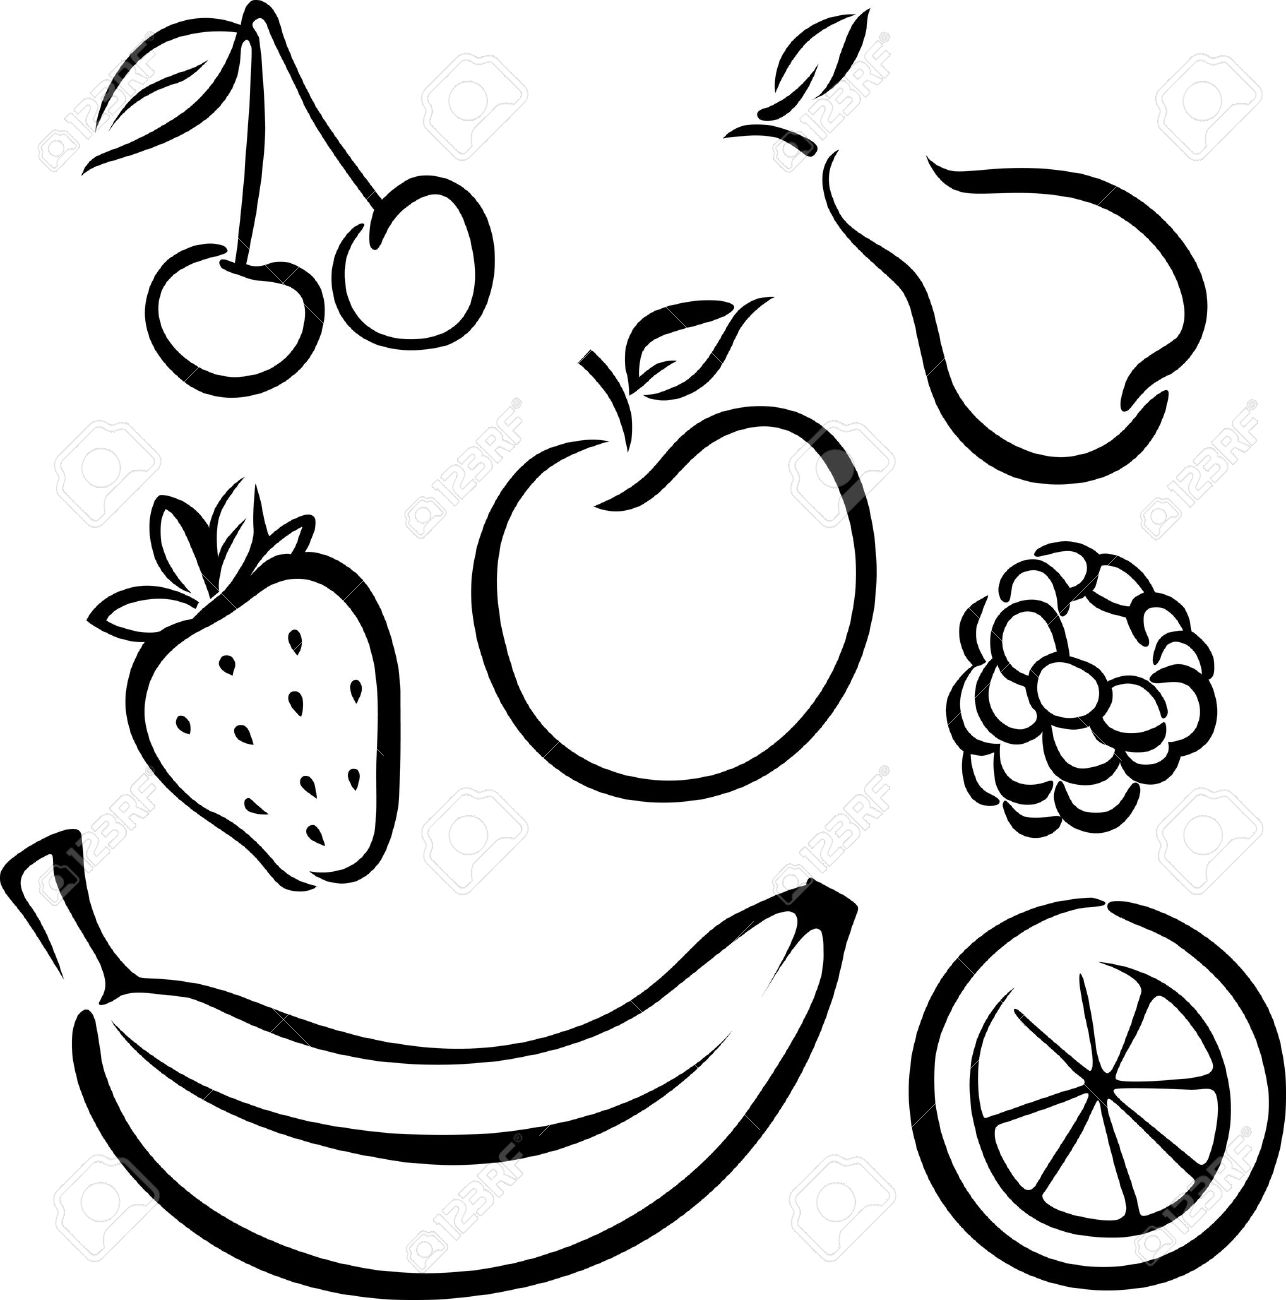 clipart fruits black and white - photo #22